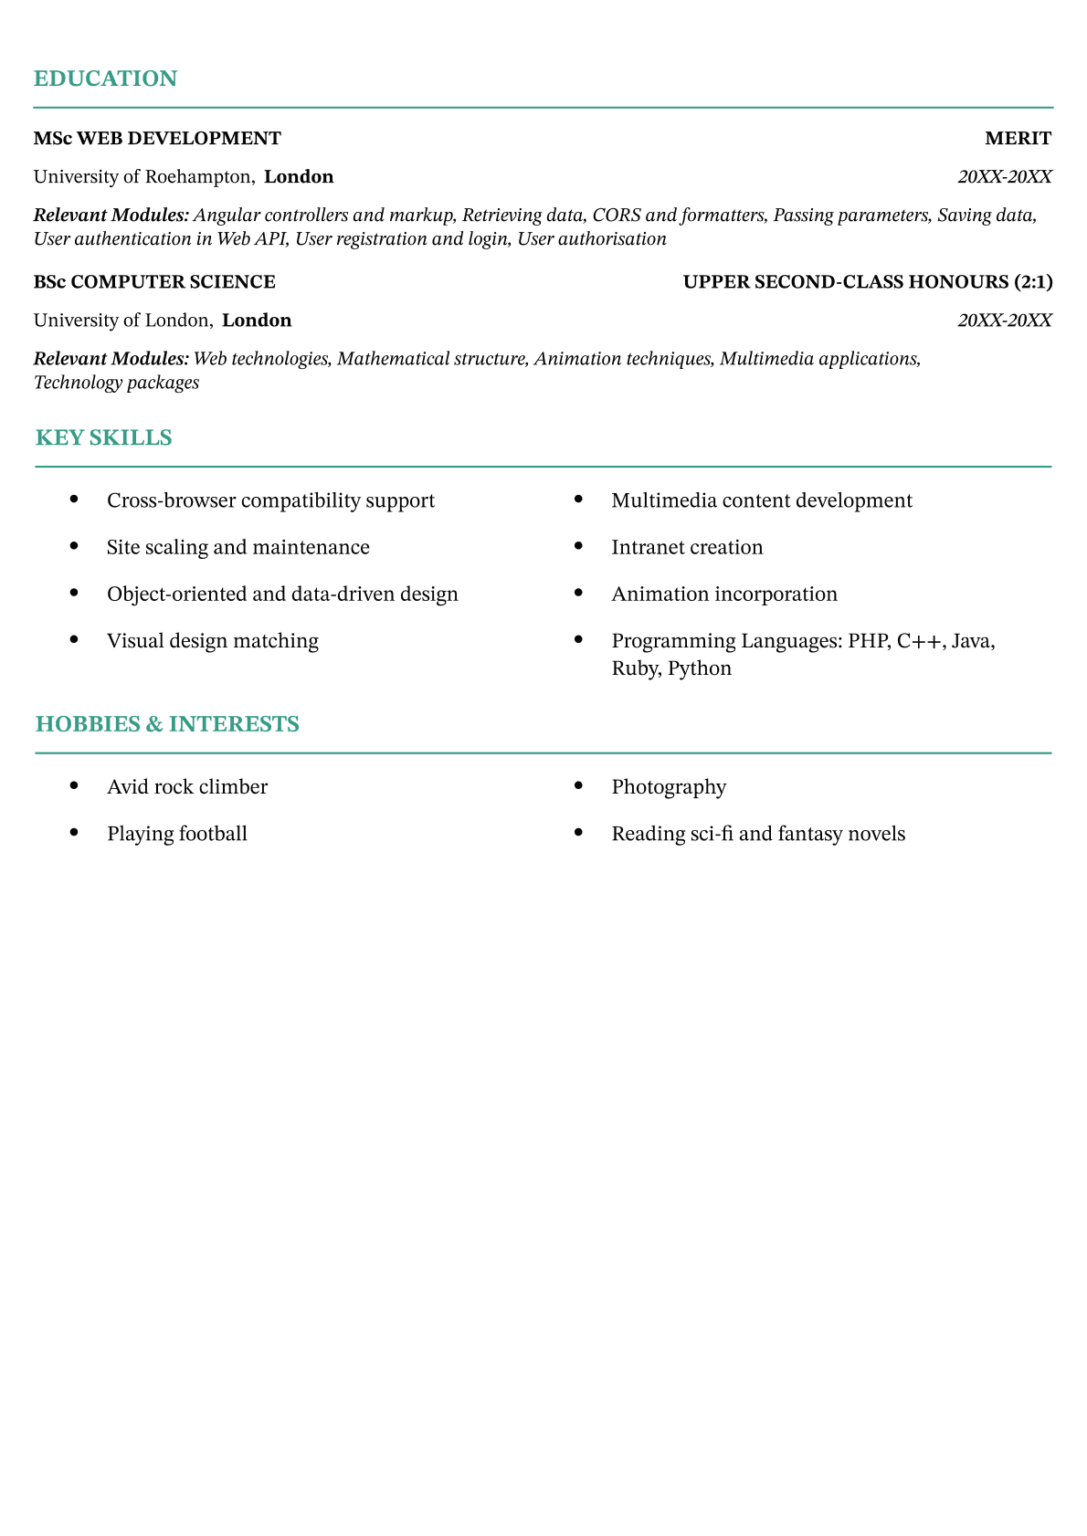 The Birmingham CV template in green (page two), which features the same strong colourful lines as page one to divide the sections on the page: education, skills, and hobbies/interests. The skills and hobbies sections use two-column designs to minimise waste of precious CV real estate